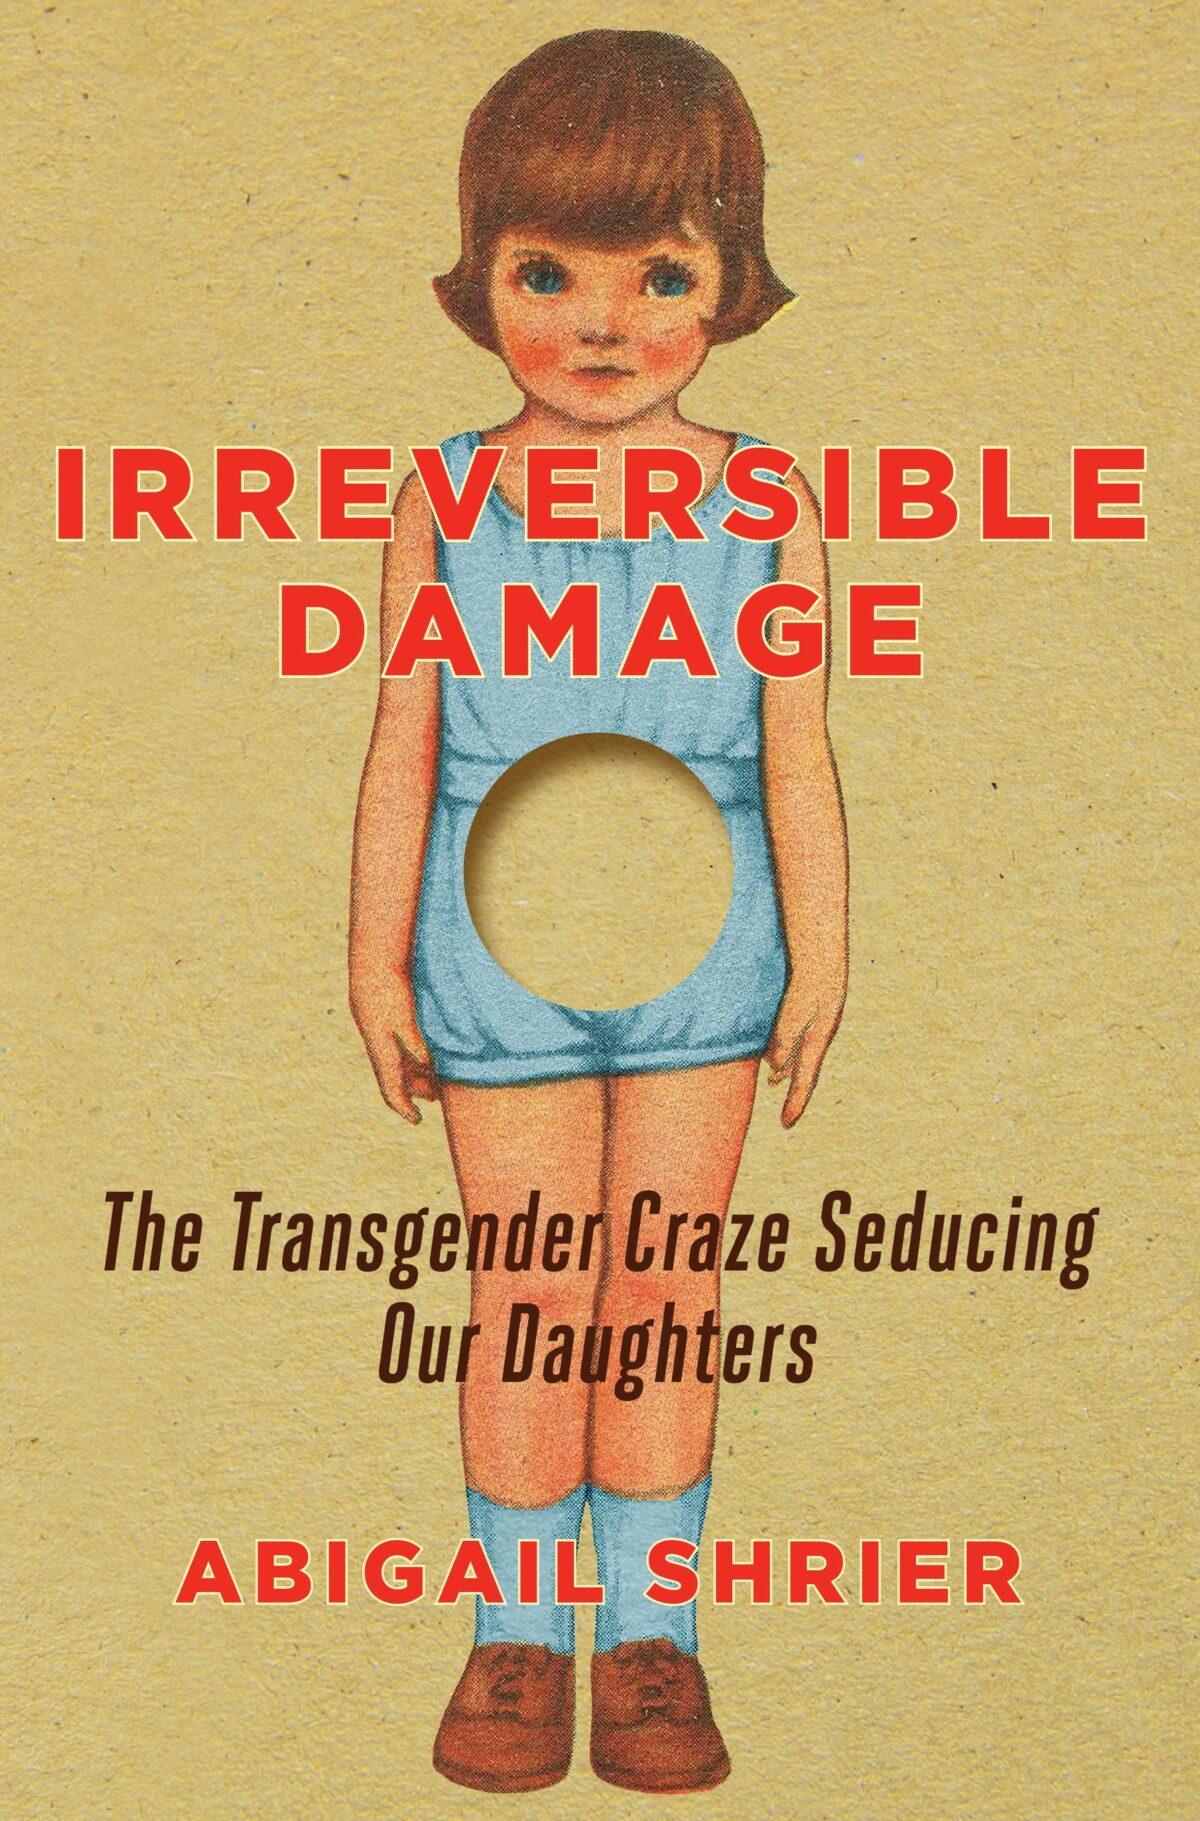 Cover of "Irreversible Damage: The Transgender Craze Seducing Our Daughters" by Abigail Shrier. (Courtesy of Abigail Shrier)